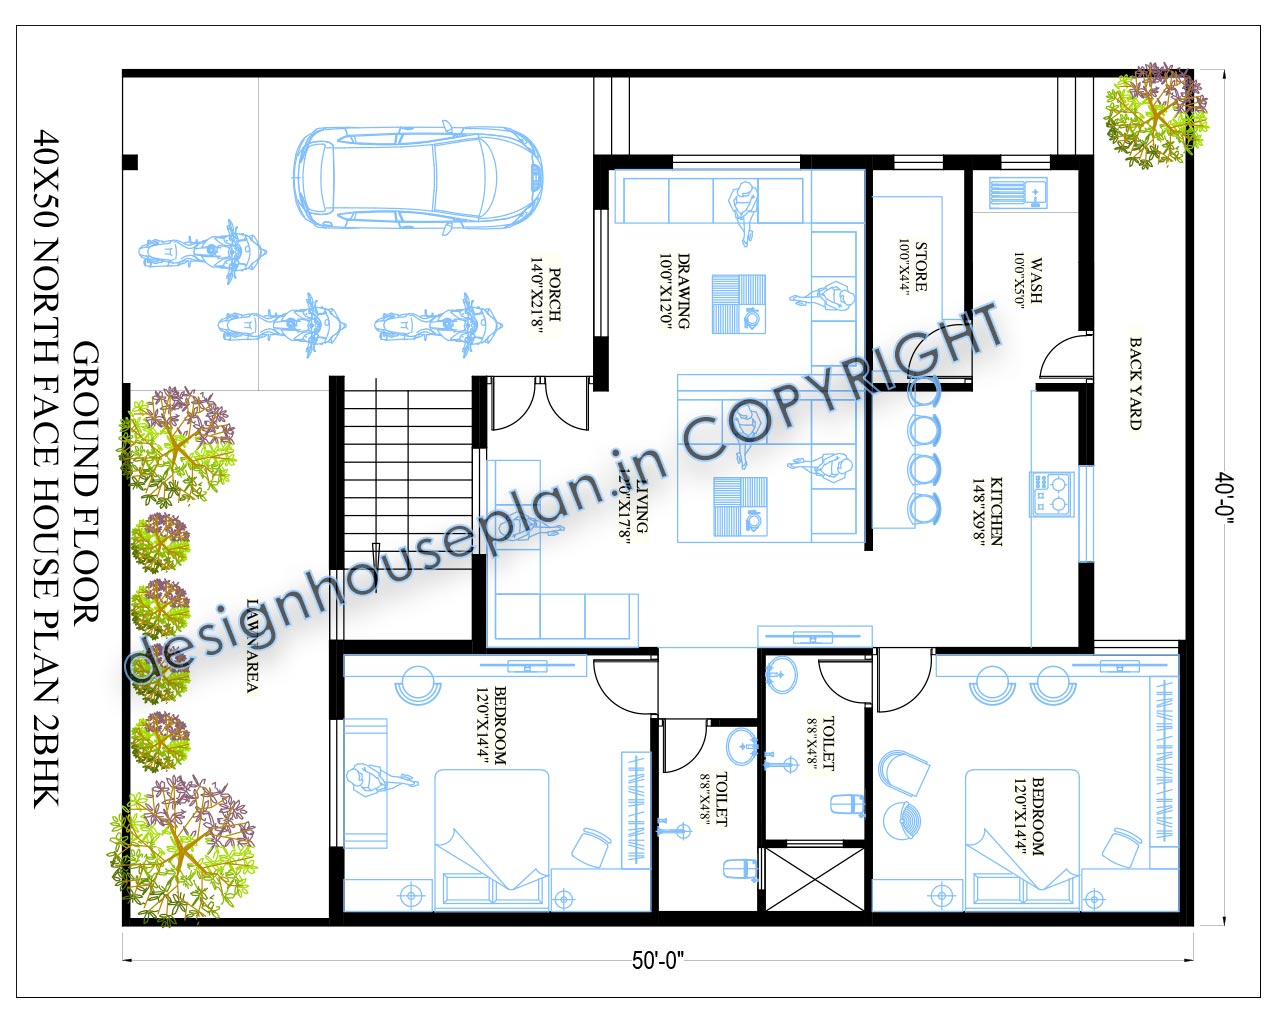 This is a north facing 2 bedroom modern house design with parking and lawn area.